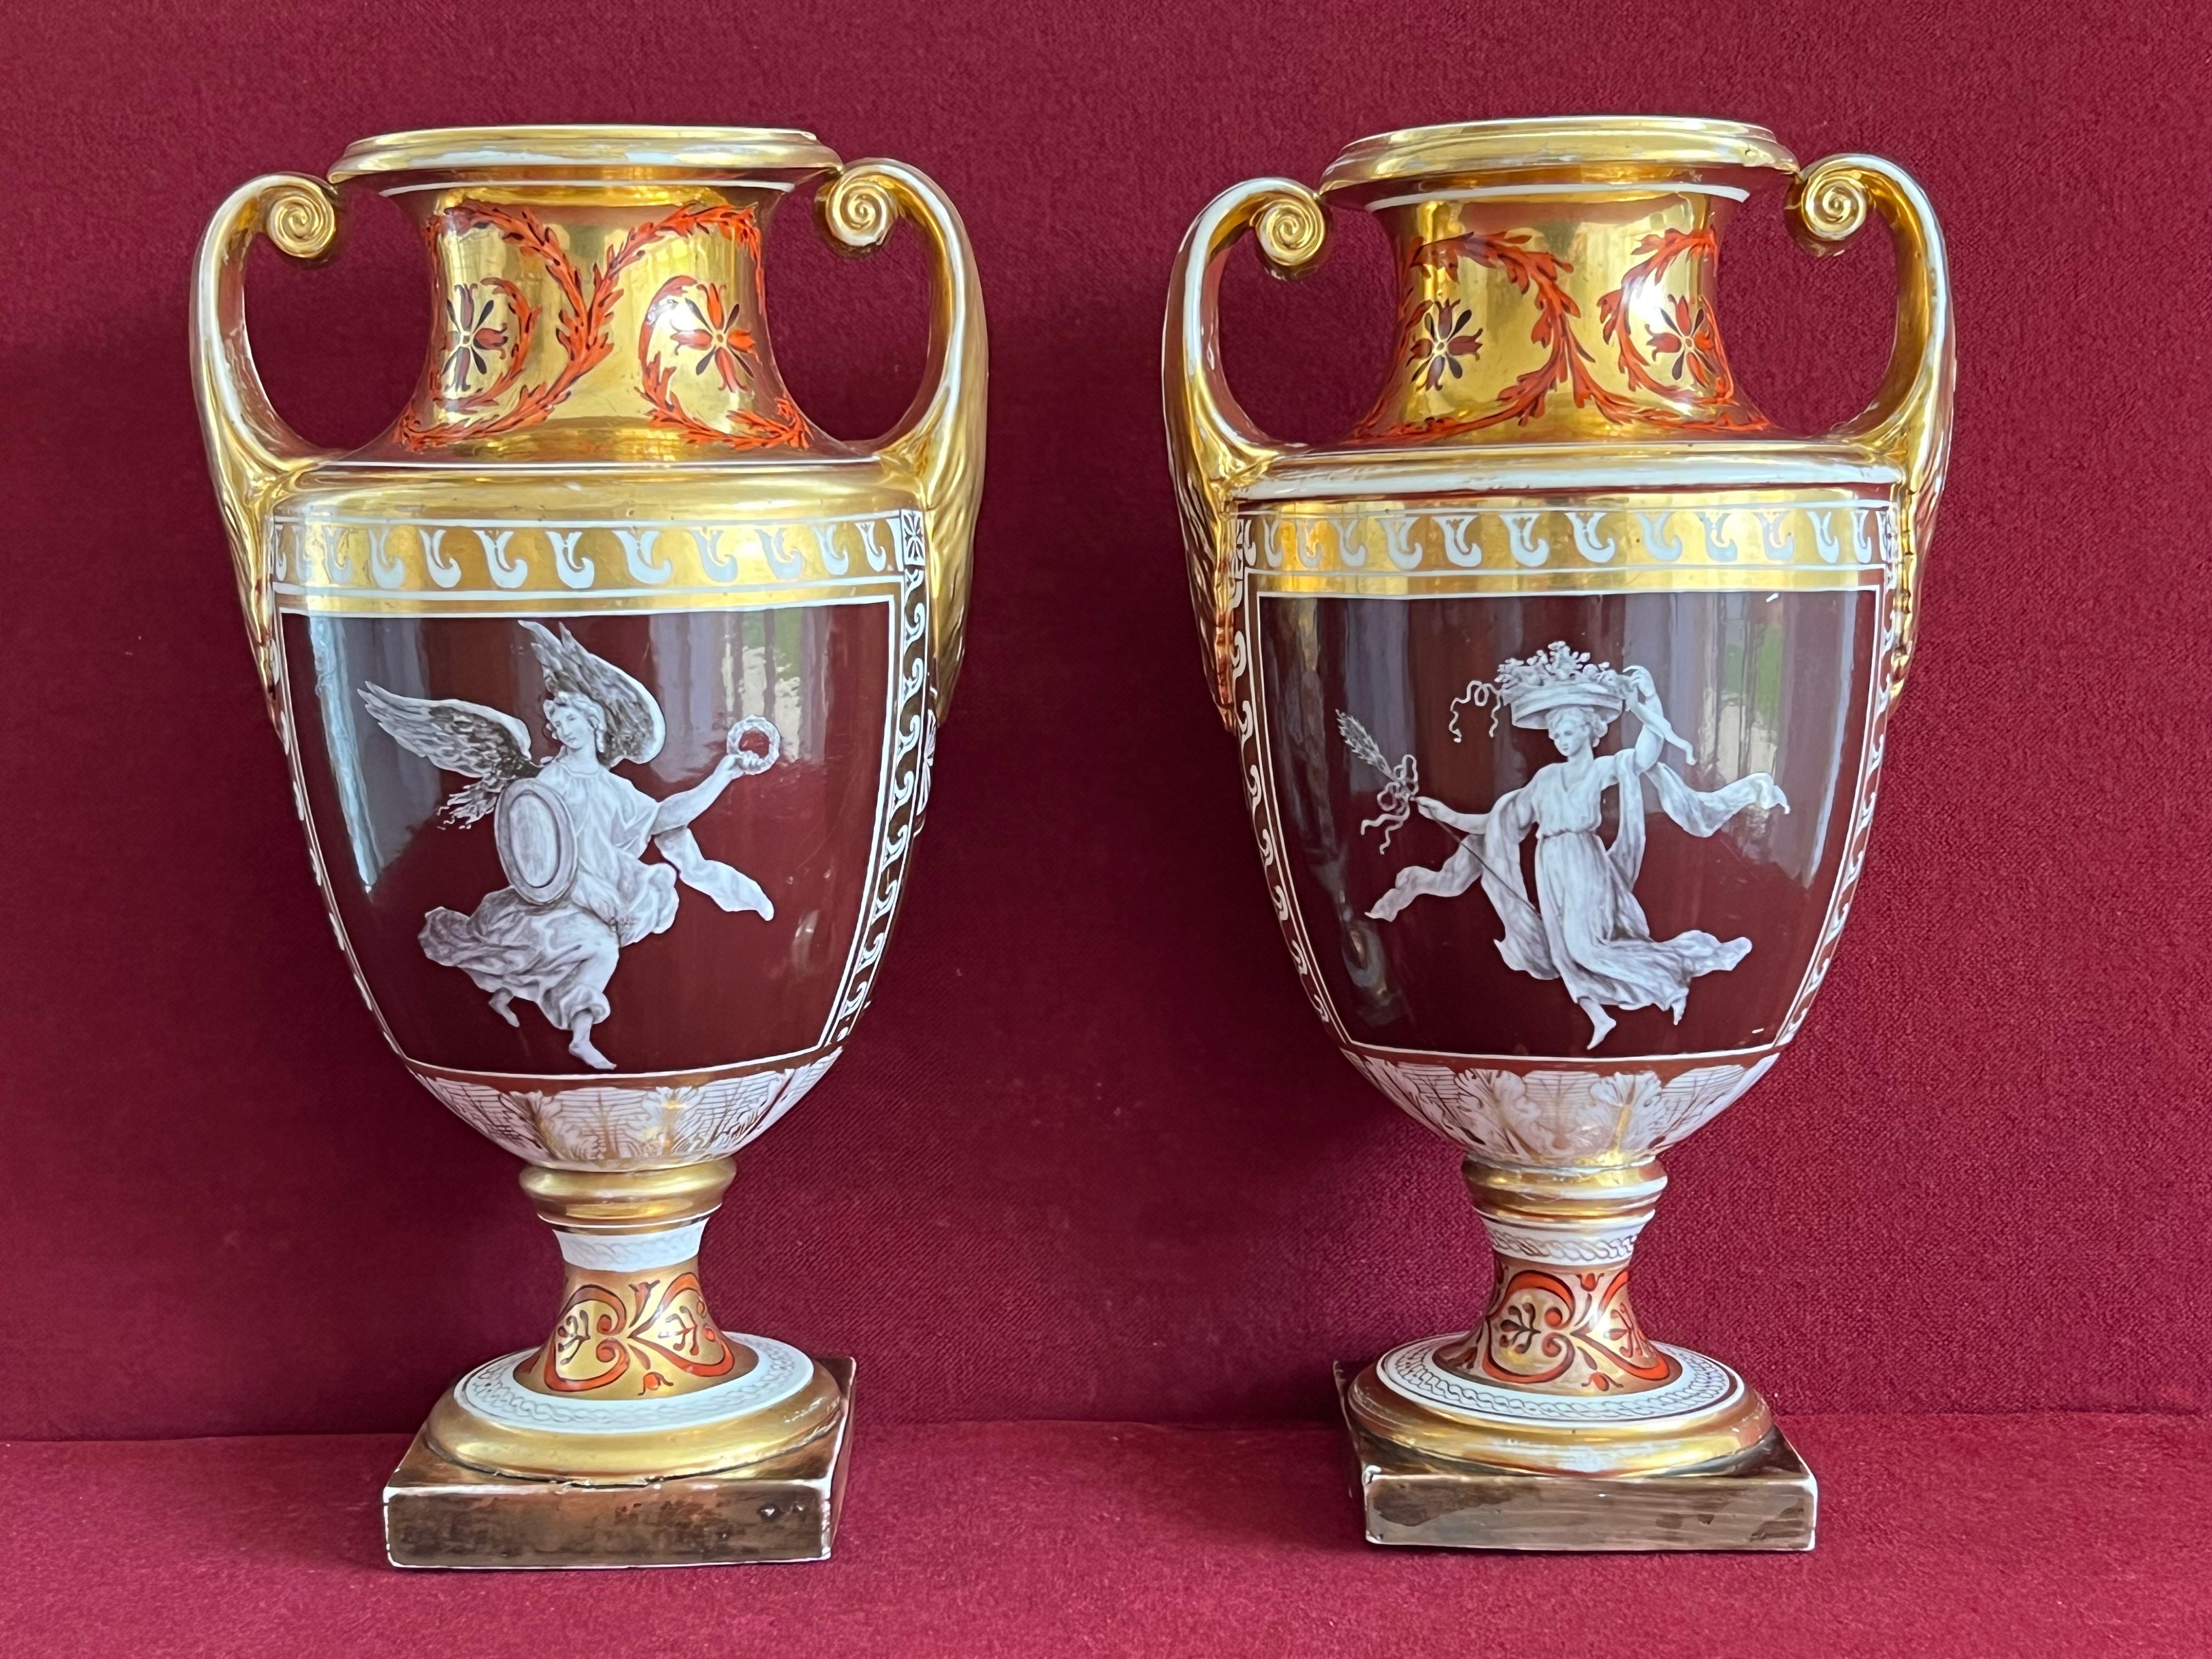 A rare pair of Coalport porcelain vases c.1802-1805. Each vase of slender classical form with scrolled handles, painted in London by Thomas Baxter ‘en grisaille’ with classical figures, reserved on a deep chocolate ground with panels of classical